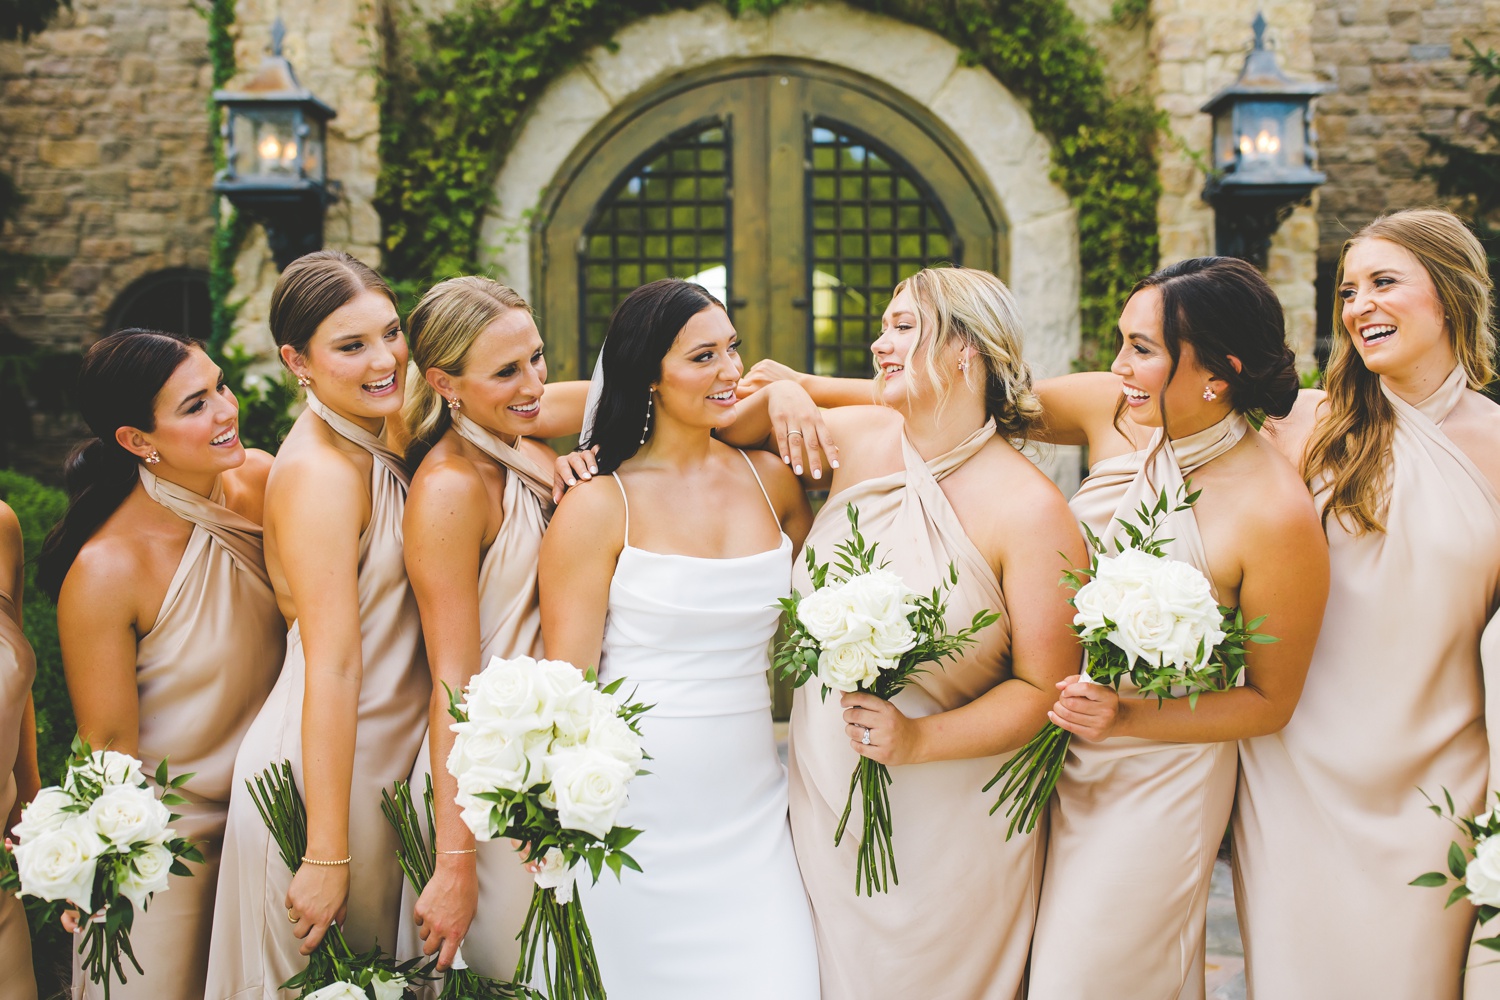 Bridesmaids in Champagne Dresses